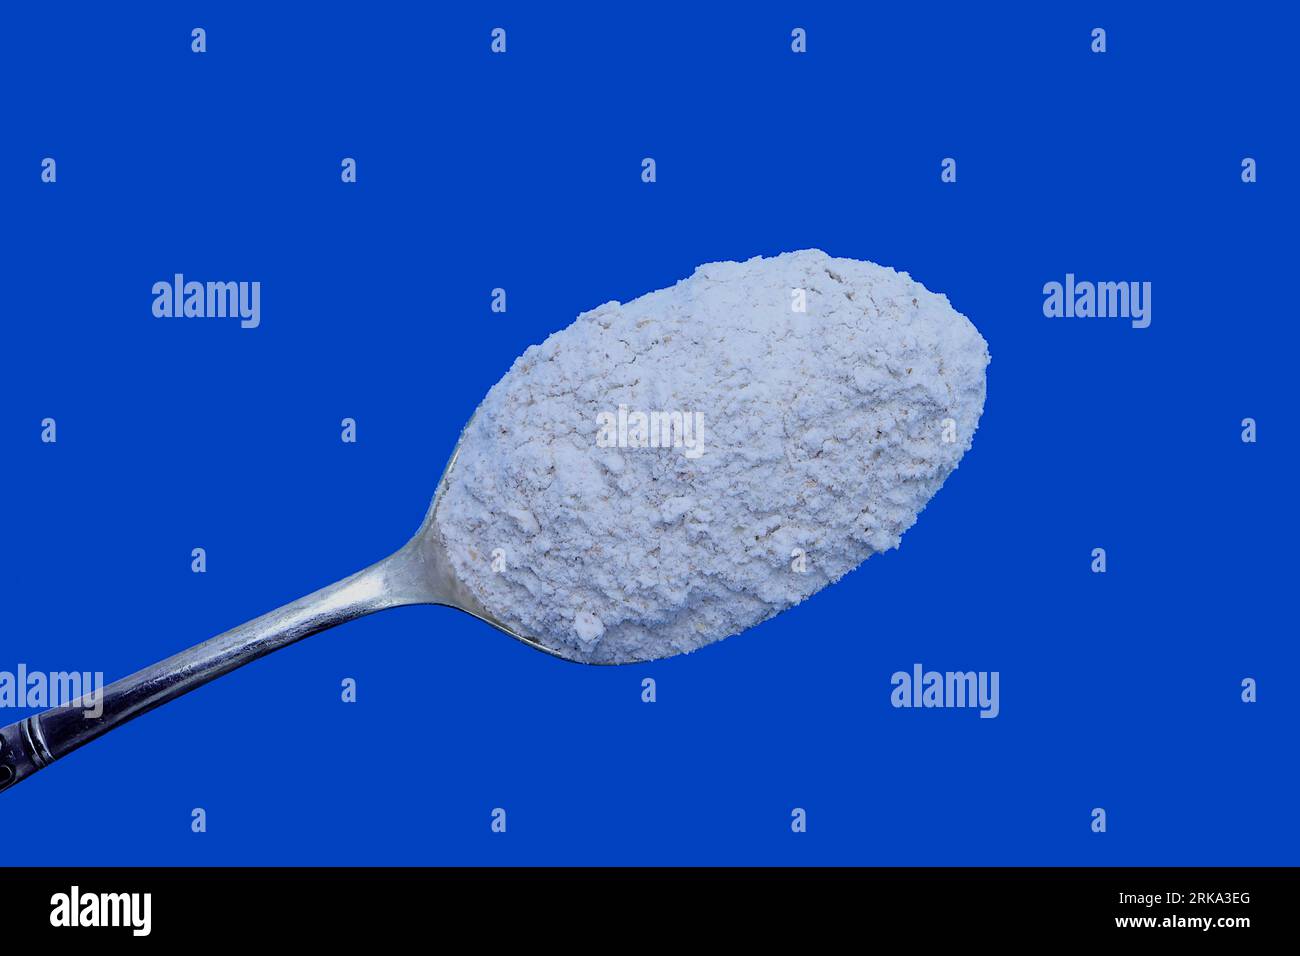 Home baking ingredients: Still life of wholemeal baking flour. Horizontal frame, blue background, copy space. Stock Photo